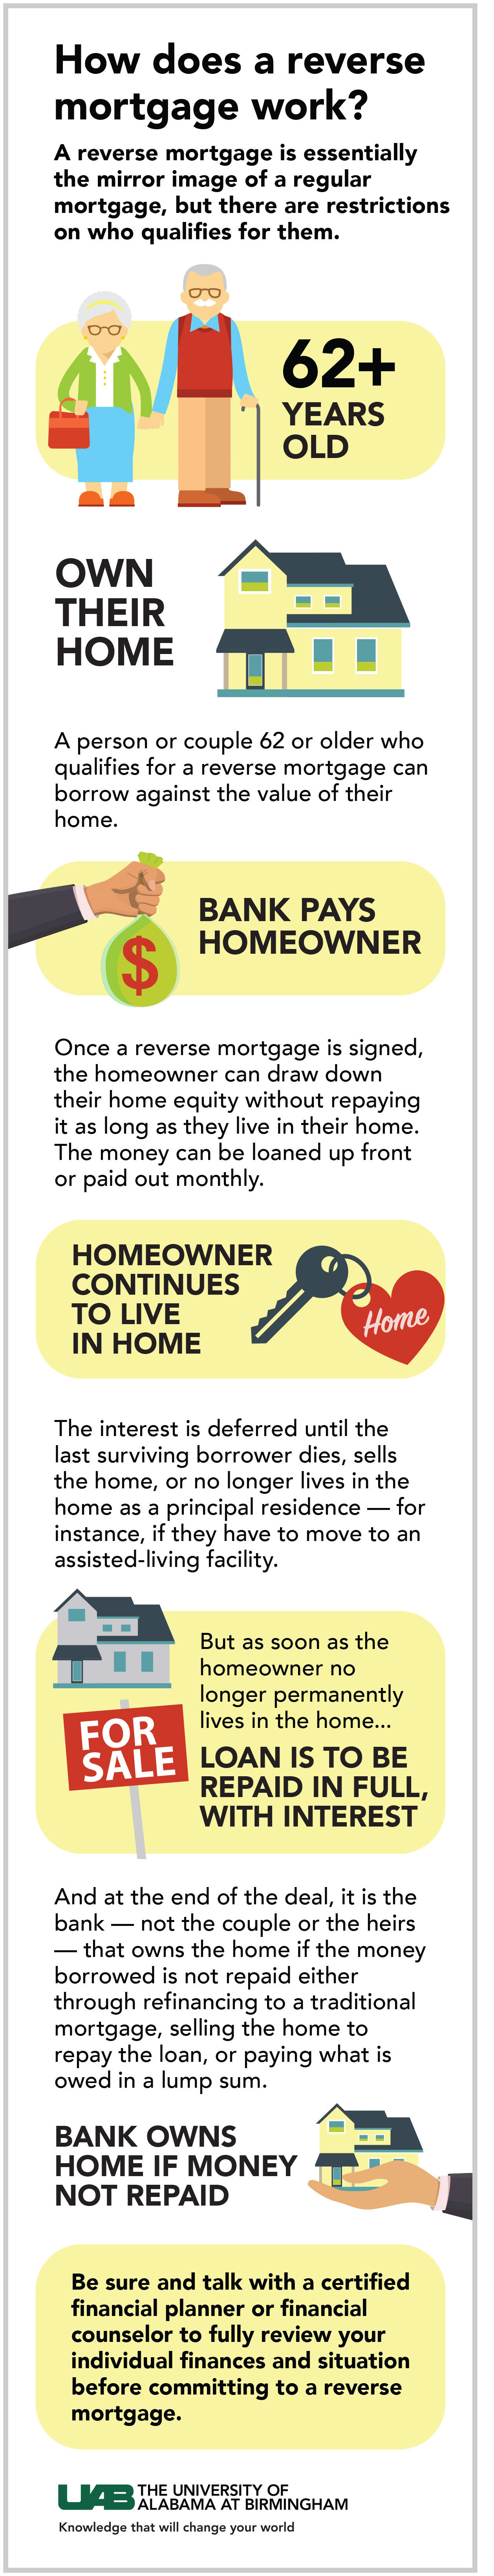 NYCU Reverse Mortgage graphic